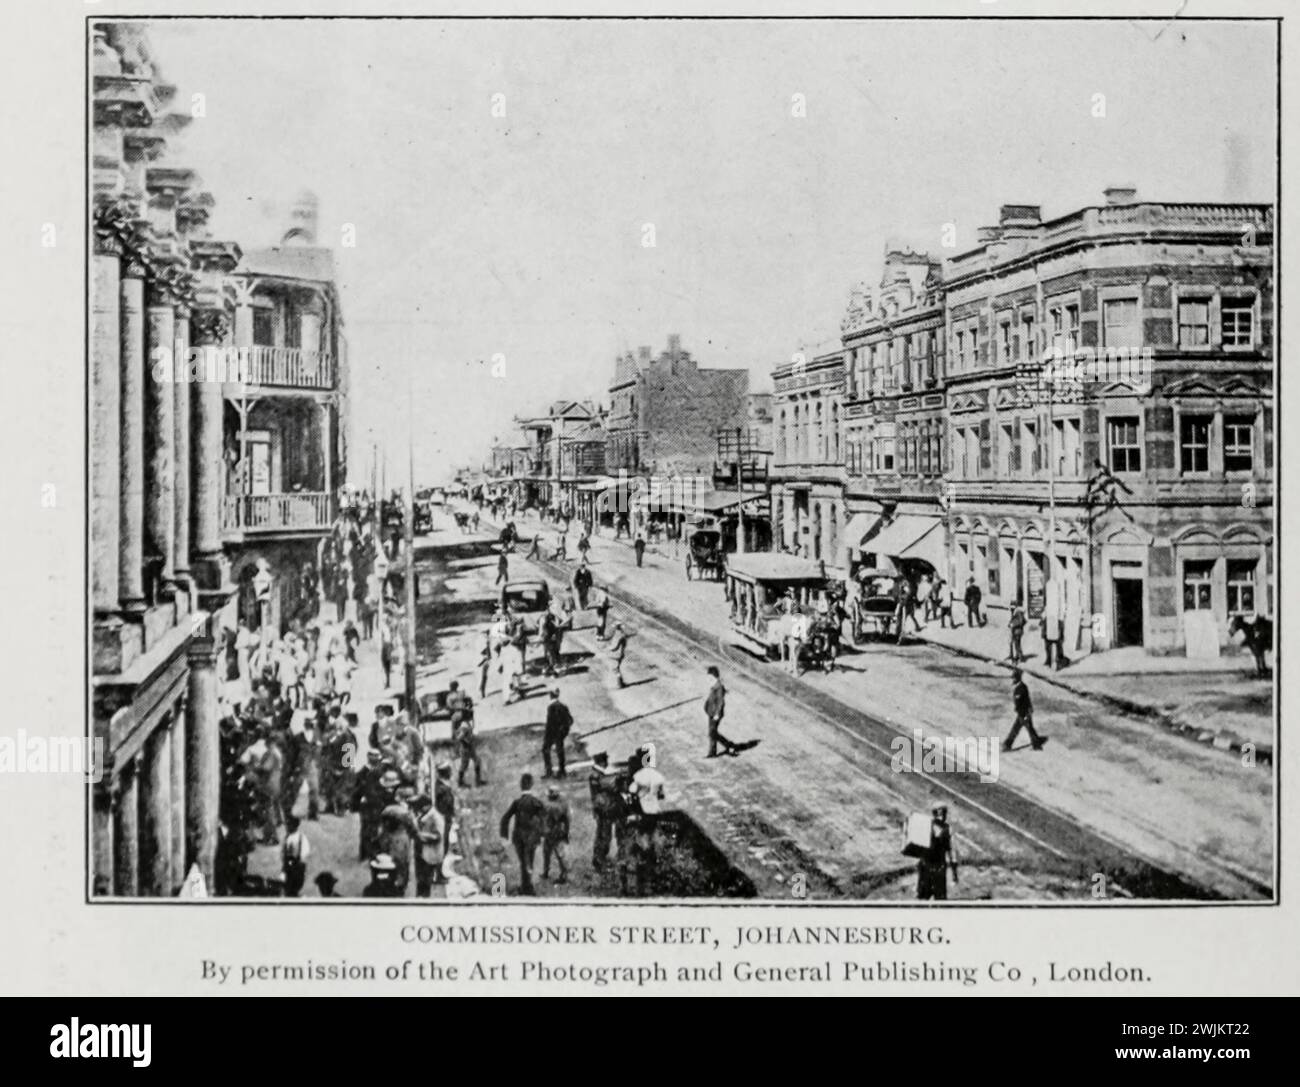 Commissioner Street, Johannesburg from the Article THE GOLD MINES OF THE WITWATERSRAND, SOUTH AFRICA. By John Hays Hammond. Part 1: THEIR RAPID DEVELOPMENT, AND THE GEOLOGY OF THE REGION. from The Engineering Magazine Devoted to Industrial Progress Volume XIV October 1897 - March 1898 The Engineering Magazine Co Stock Photo